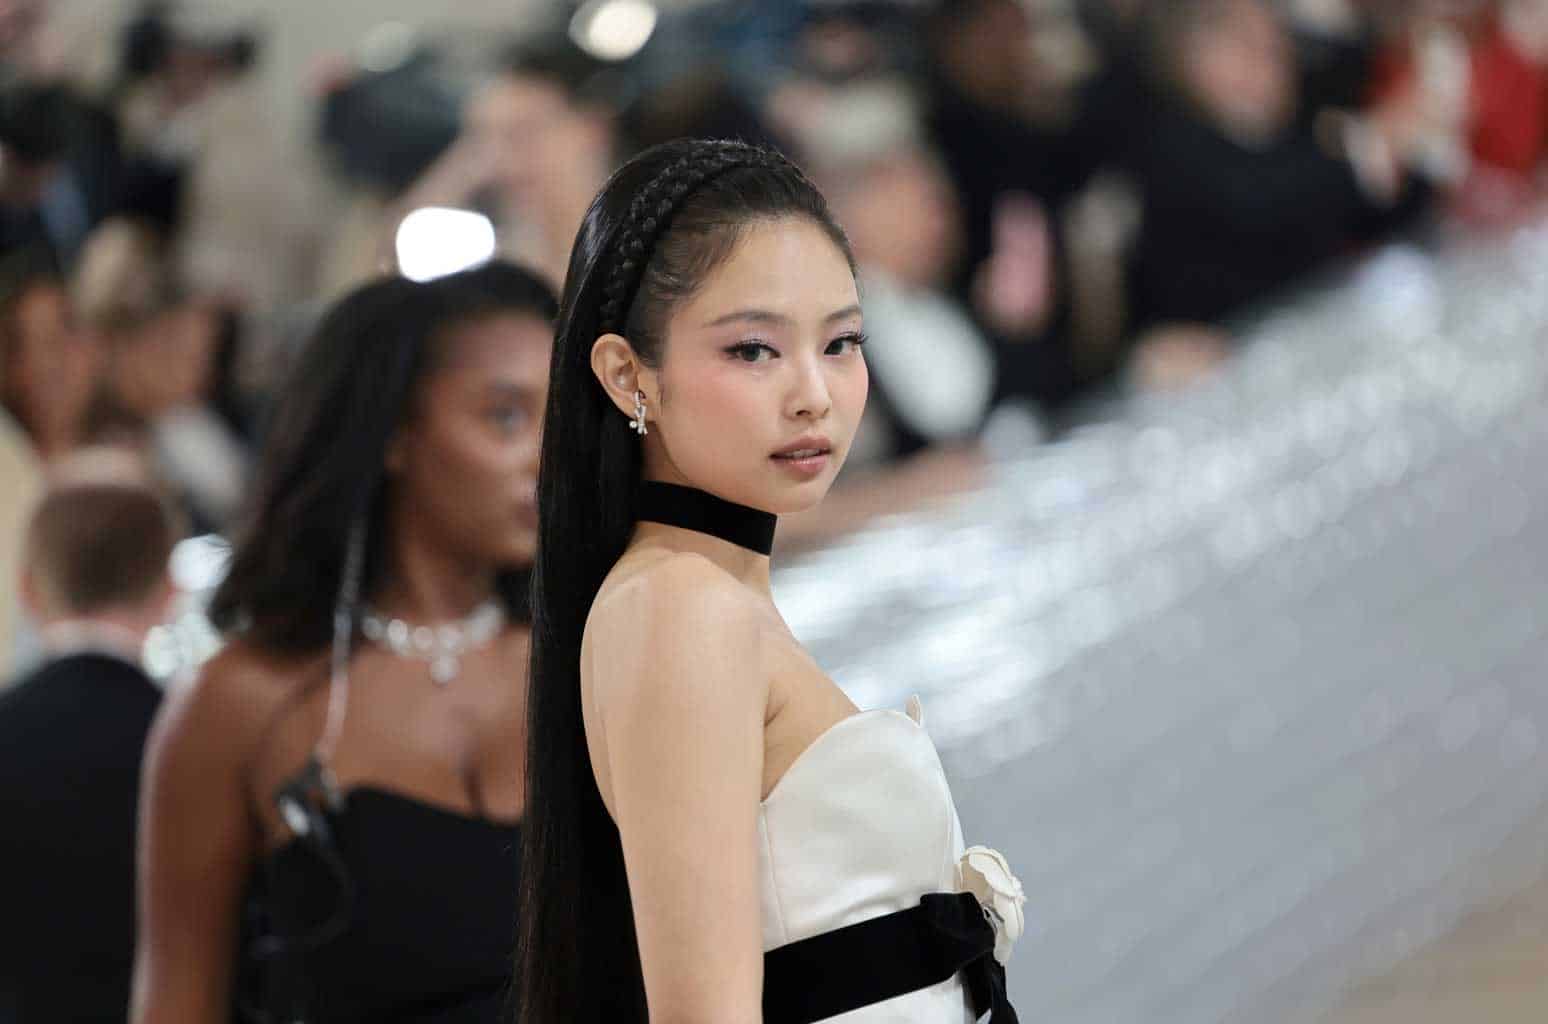 Why Jennie kim left the stage in their concert